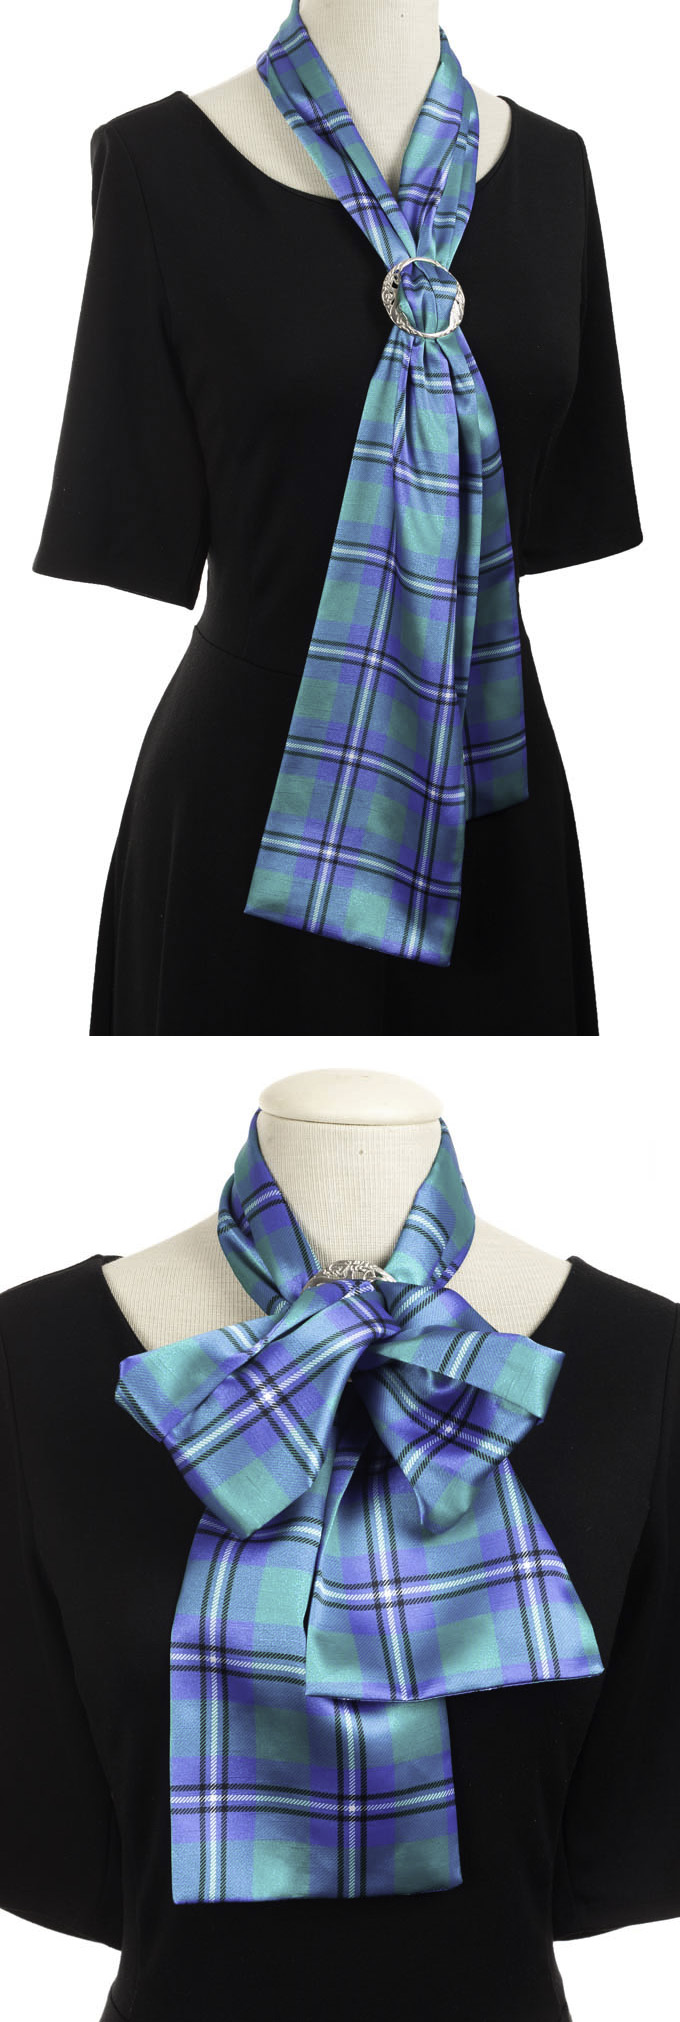 House of Tartan Scarf, with Scarf Ring, Dupion, Irvine, Irwin, Irving